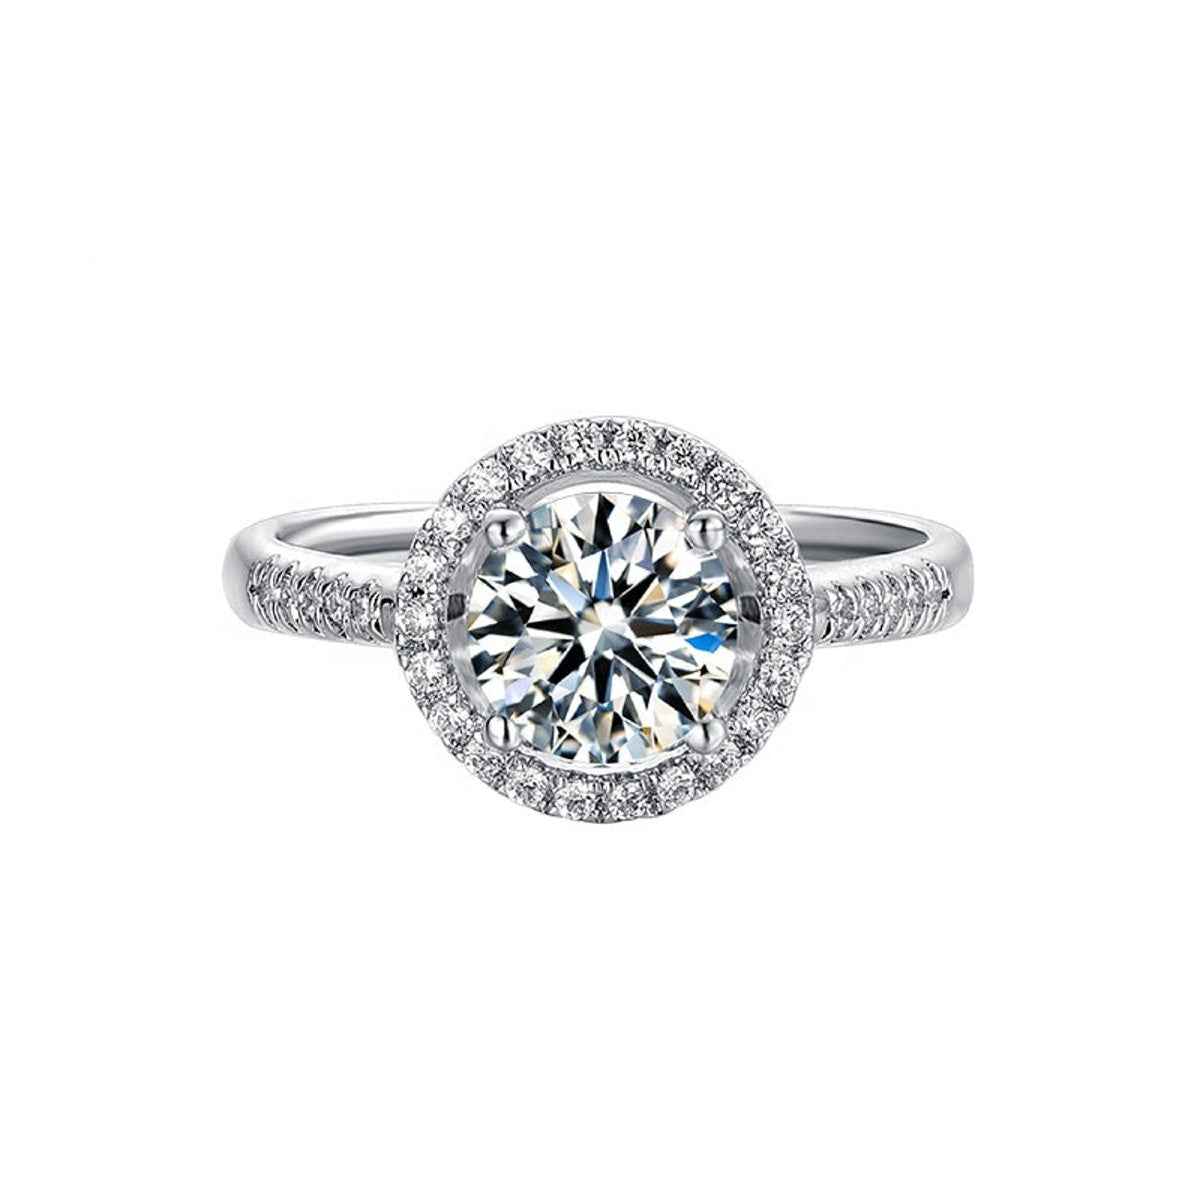 Halo Of Hearts 1.00ct Moissanite Engagement Ring Set in 9ct White Gold